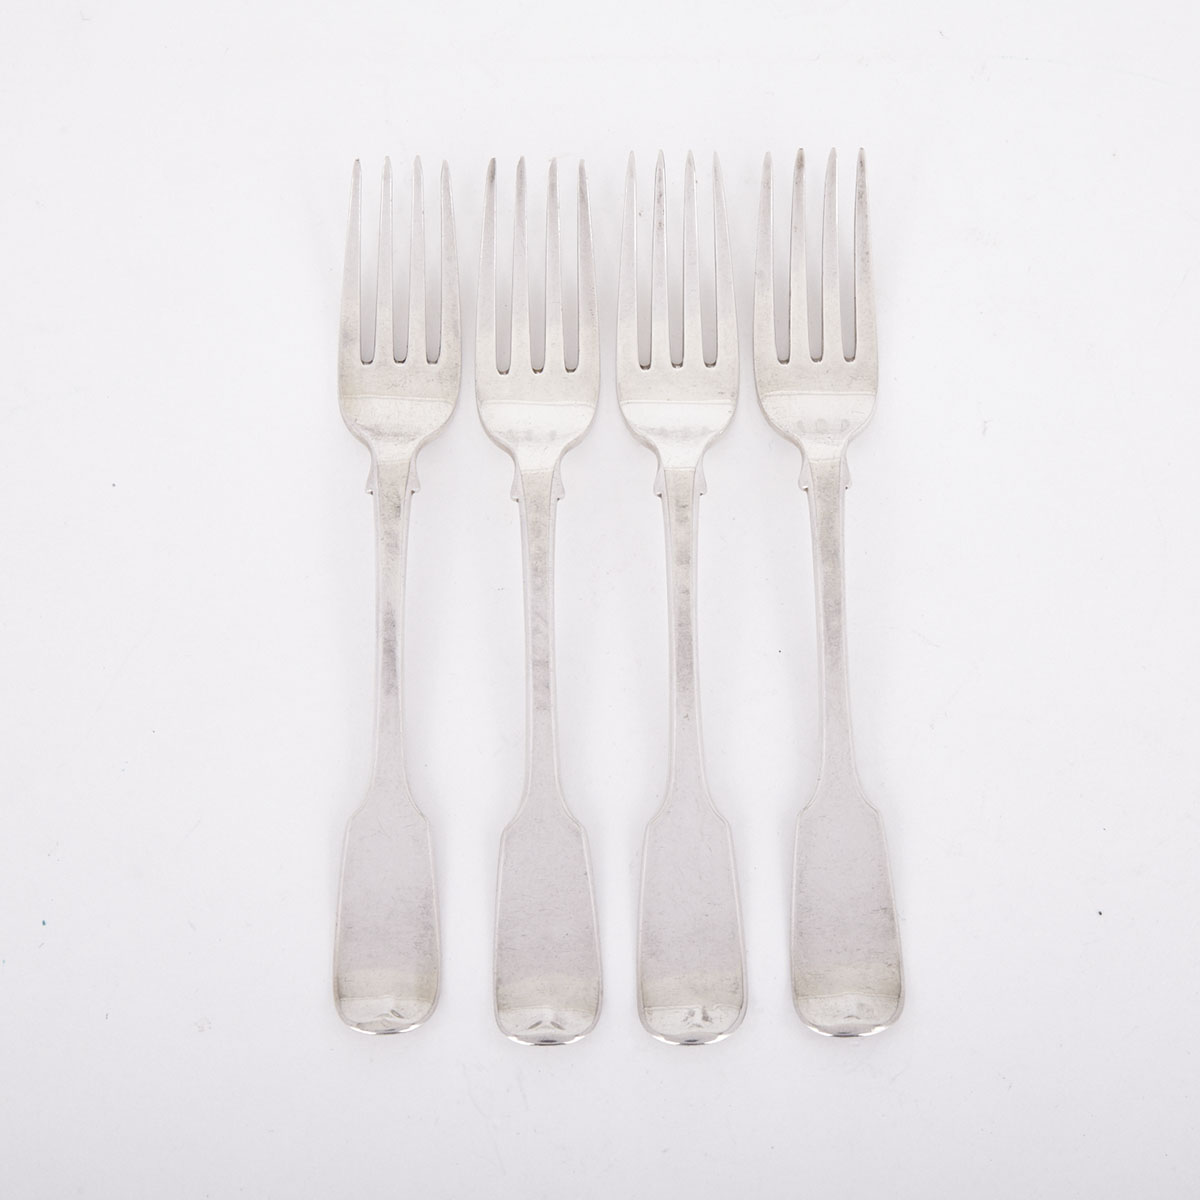 Four Canadian Silver Fiddle Pattern Dessert Forks, William C. Morrison, Toronto, Ont., mid-19th century 